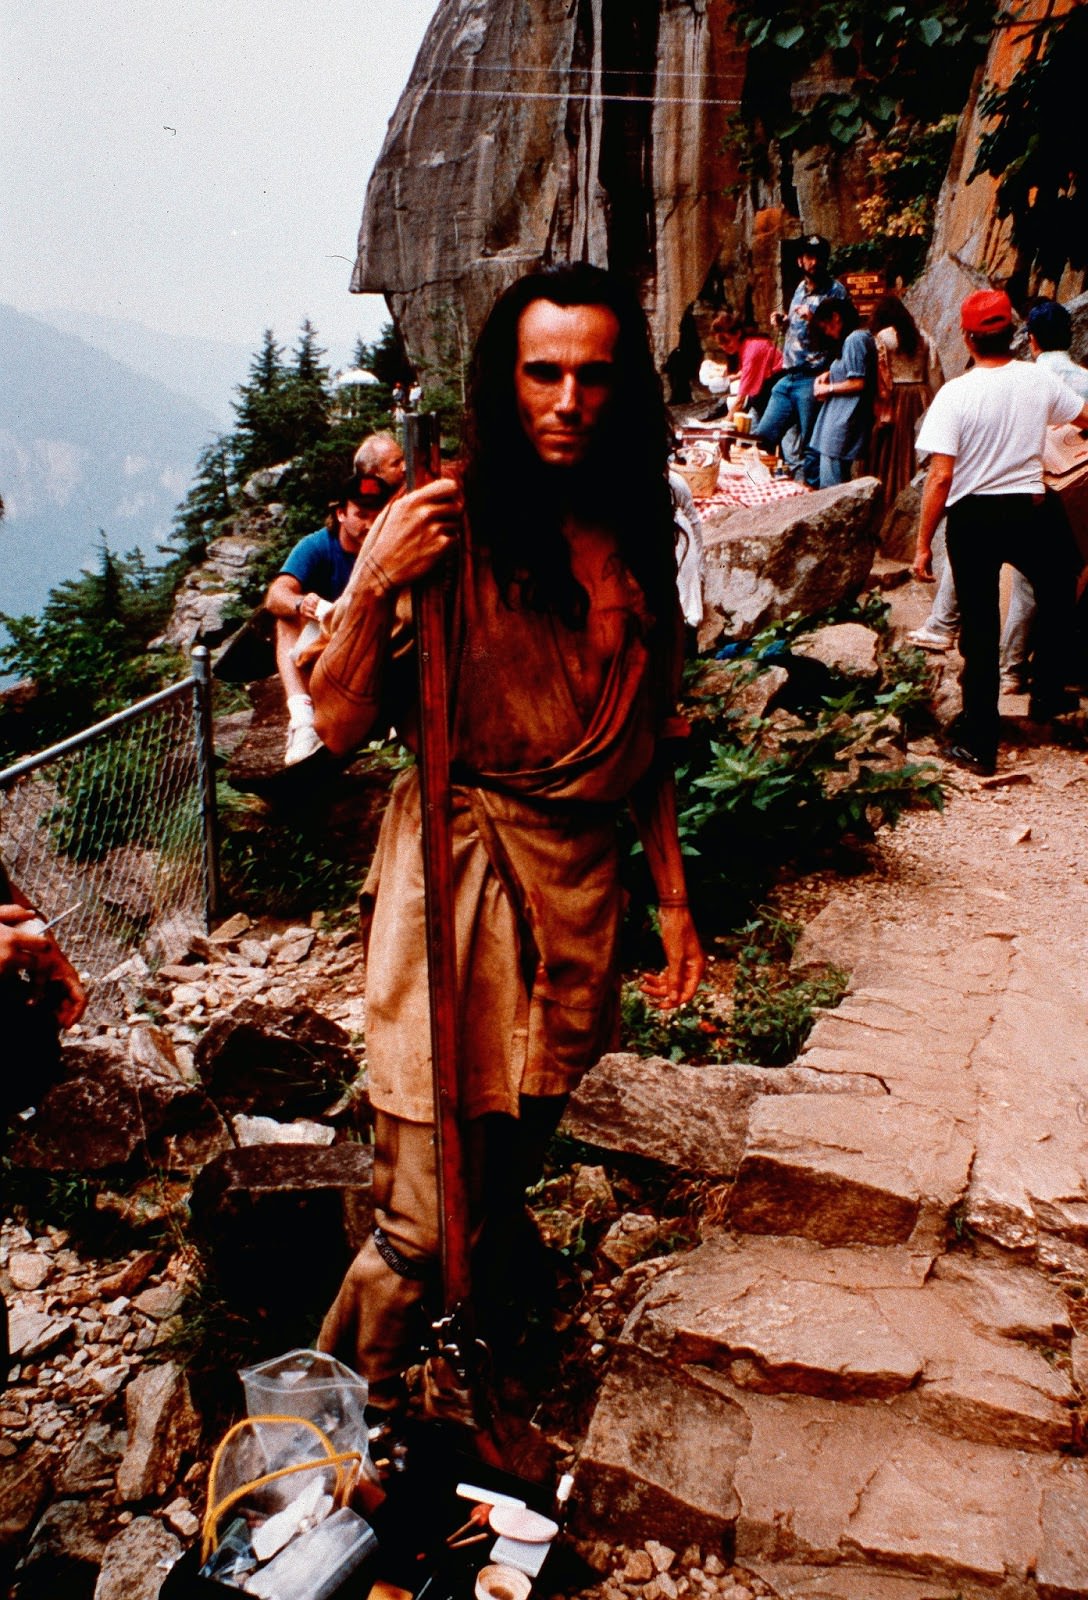 Daniel Day-Lewis takes a moment prior to filming a scene in The Last of the Mohicans (1992).